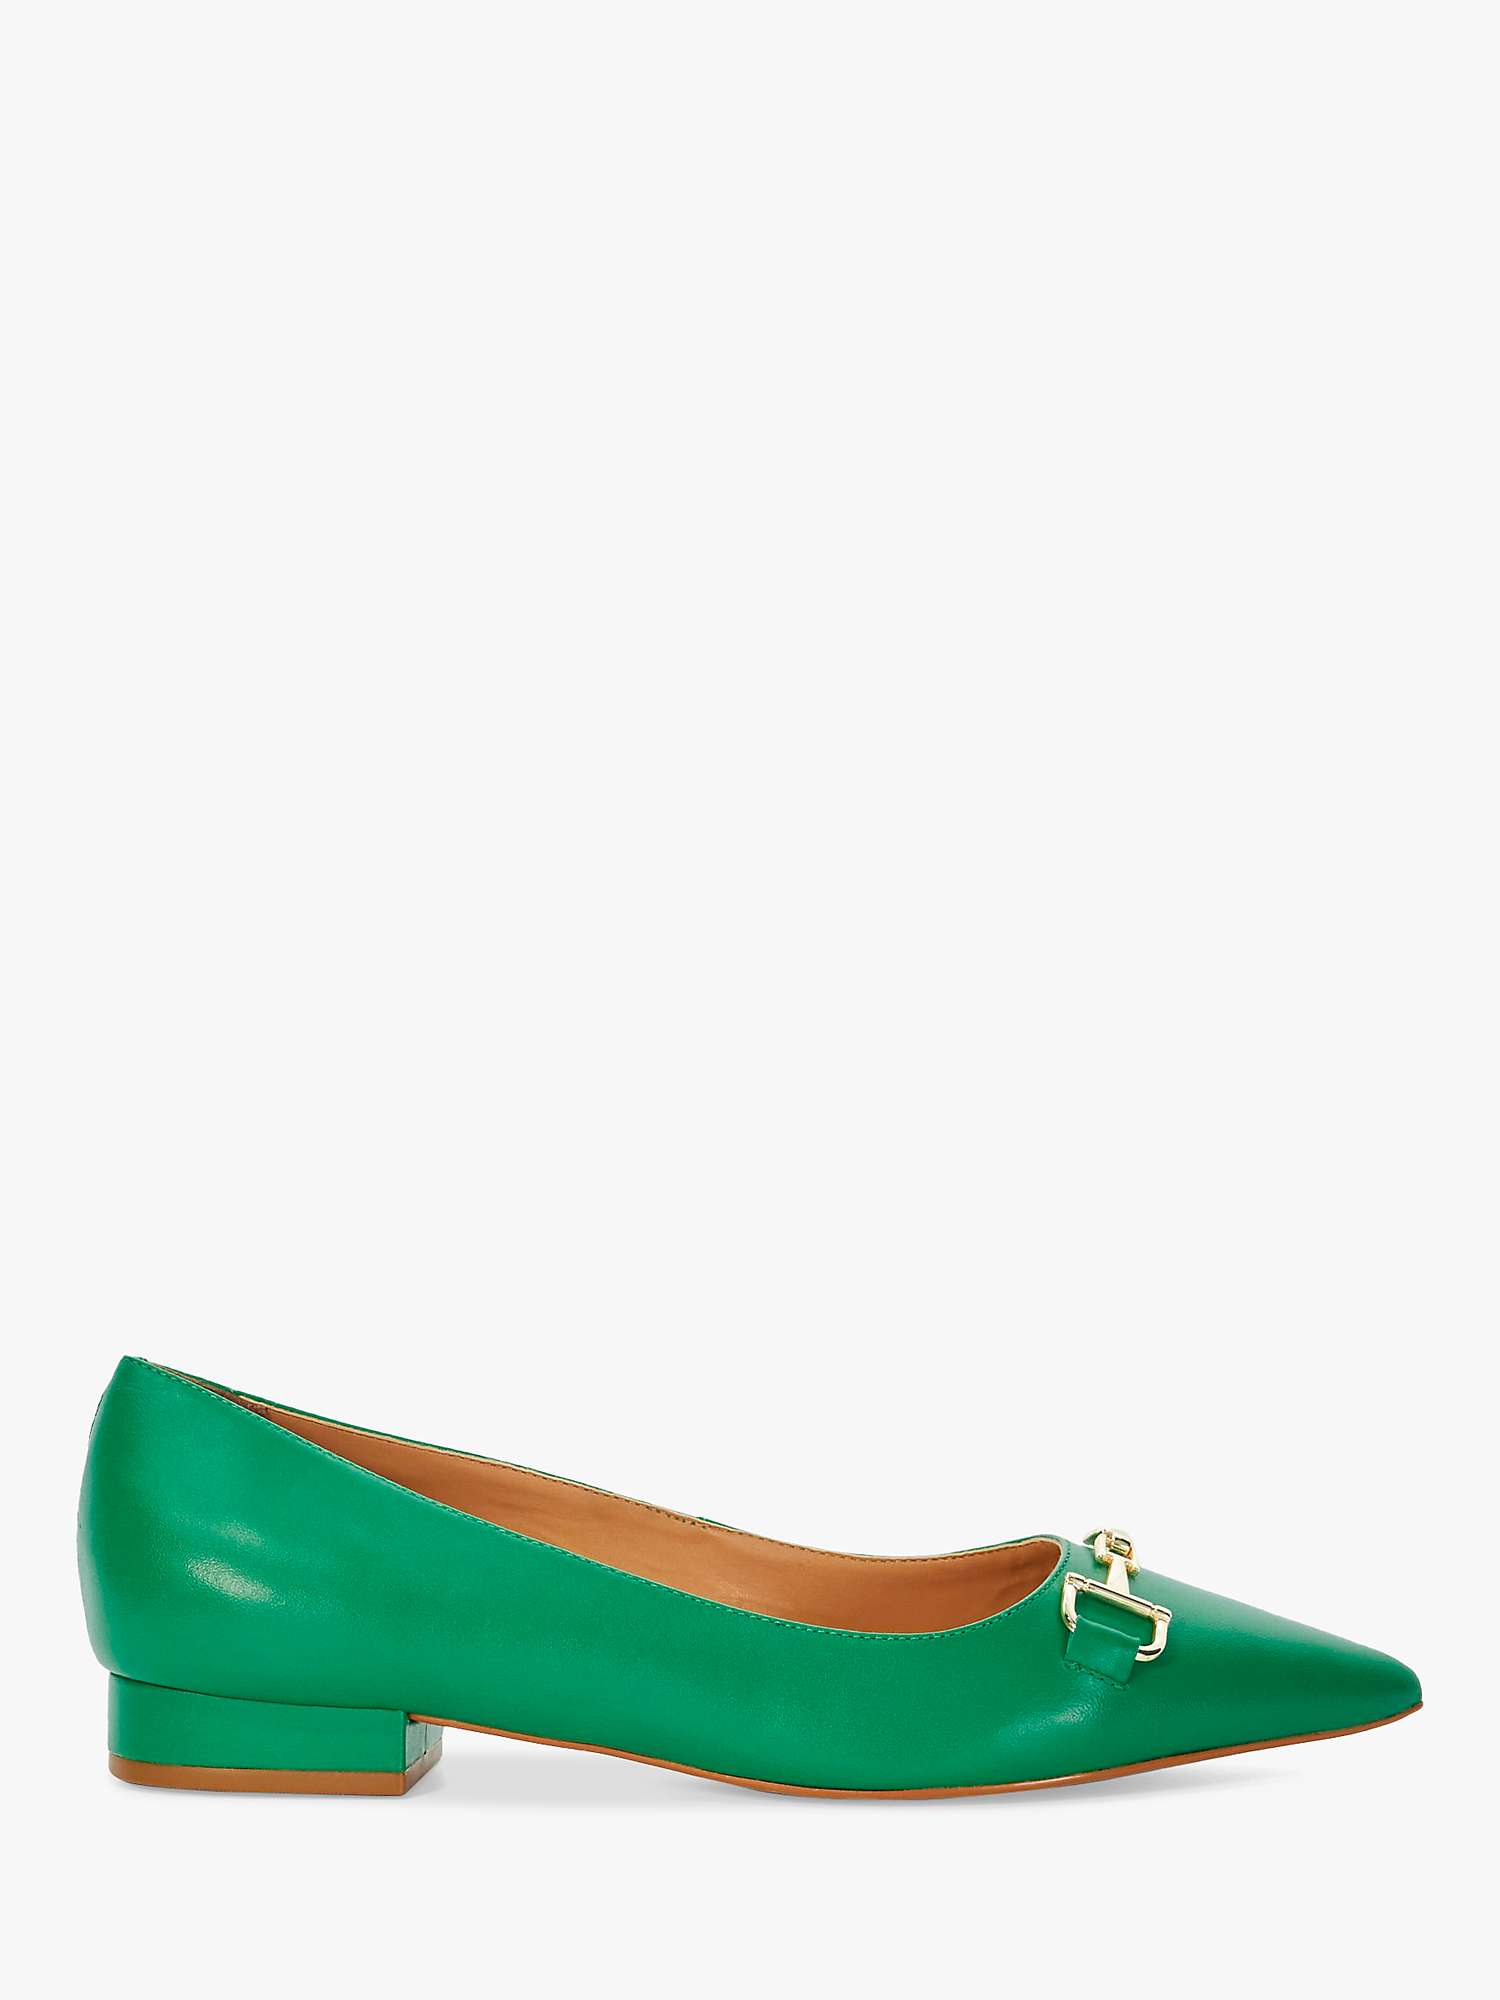 Dune Haydenne Pointed Toe Flats, Green at John Lewis & Partners